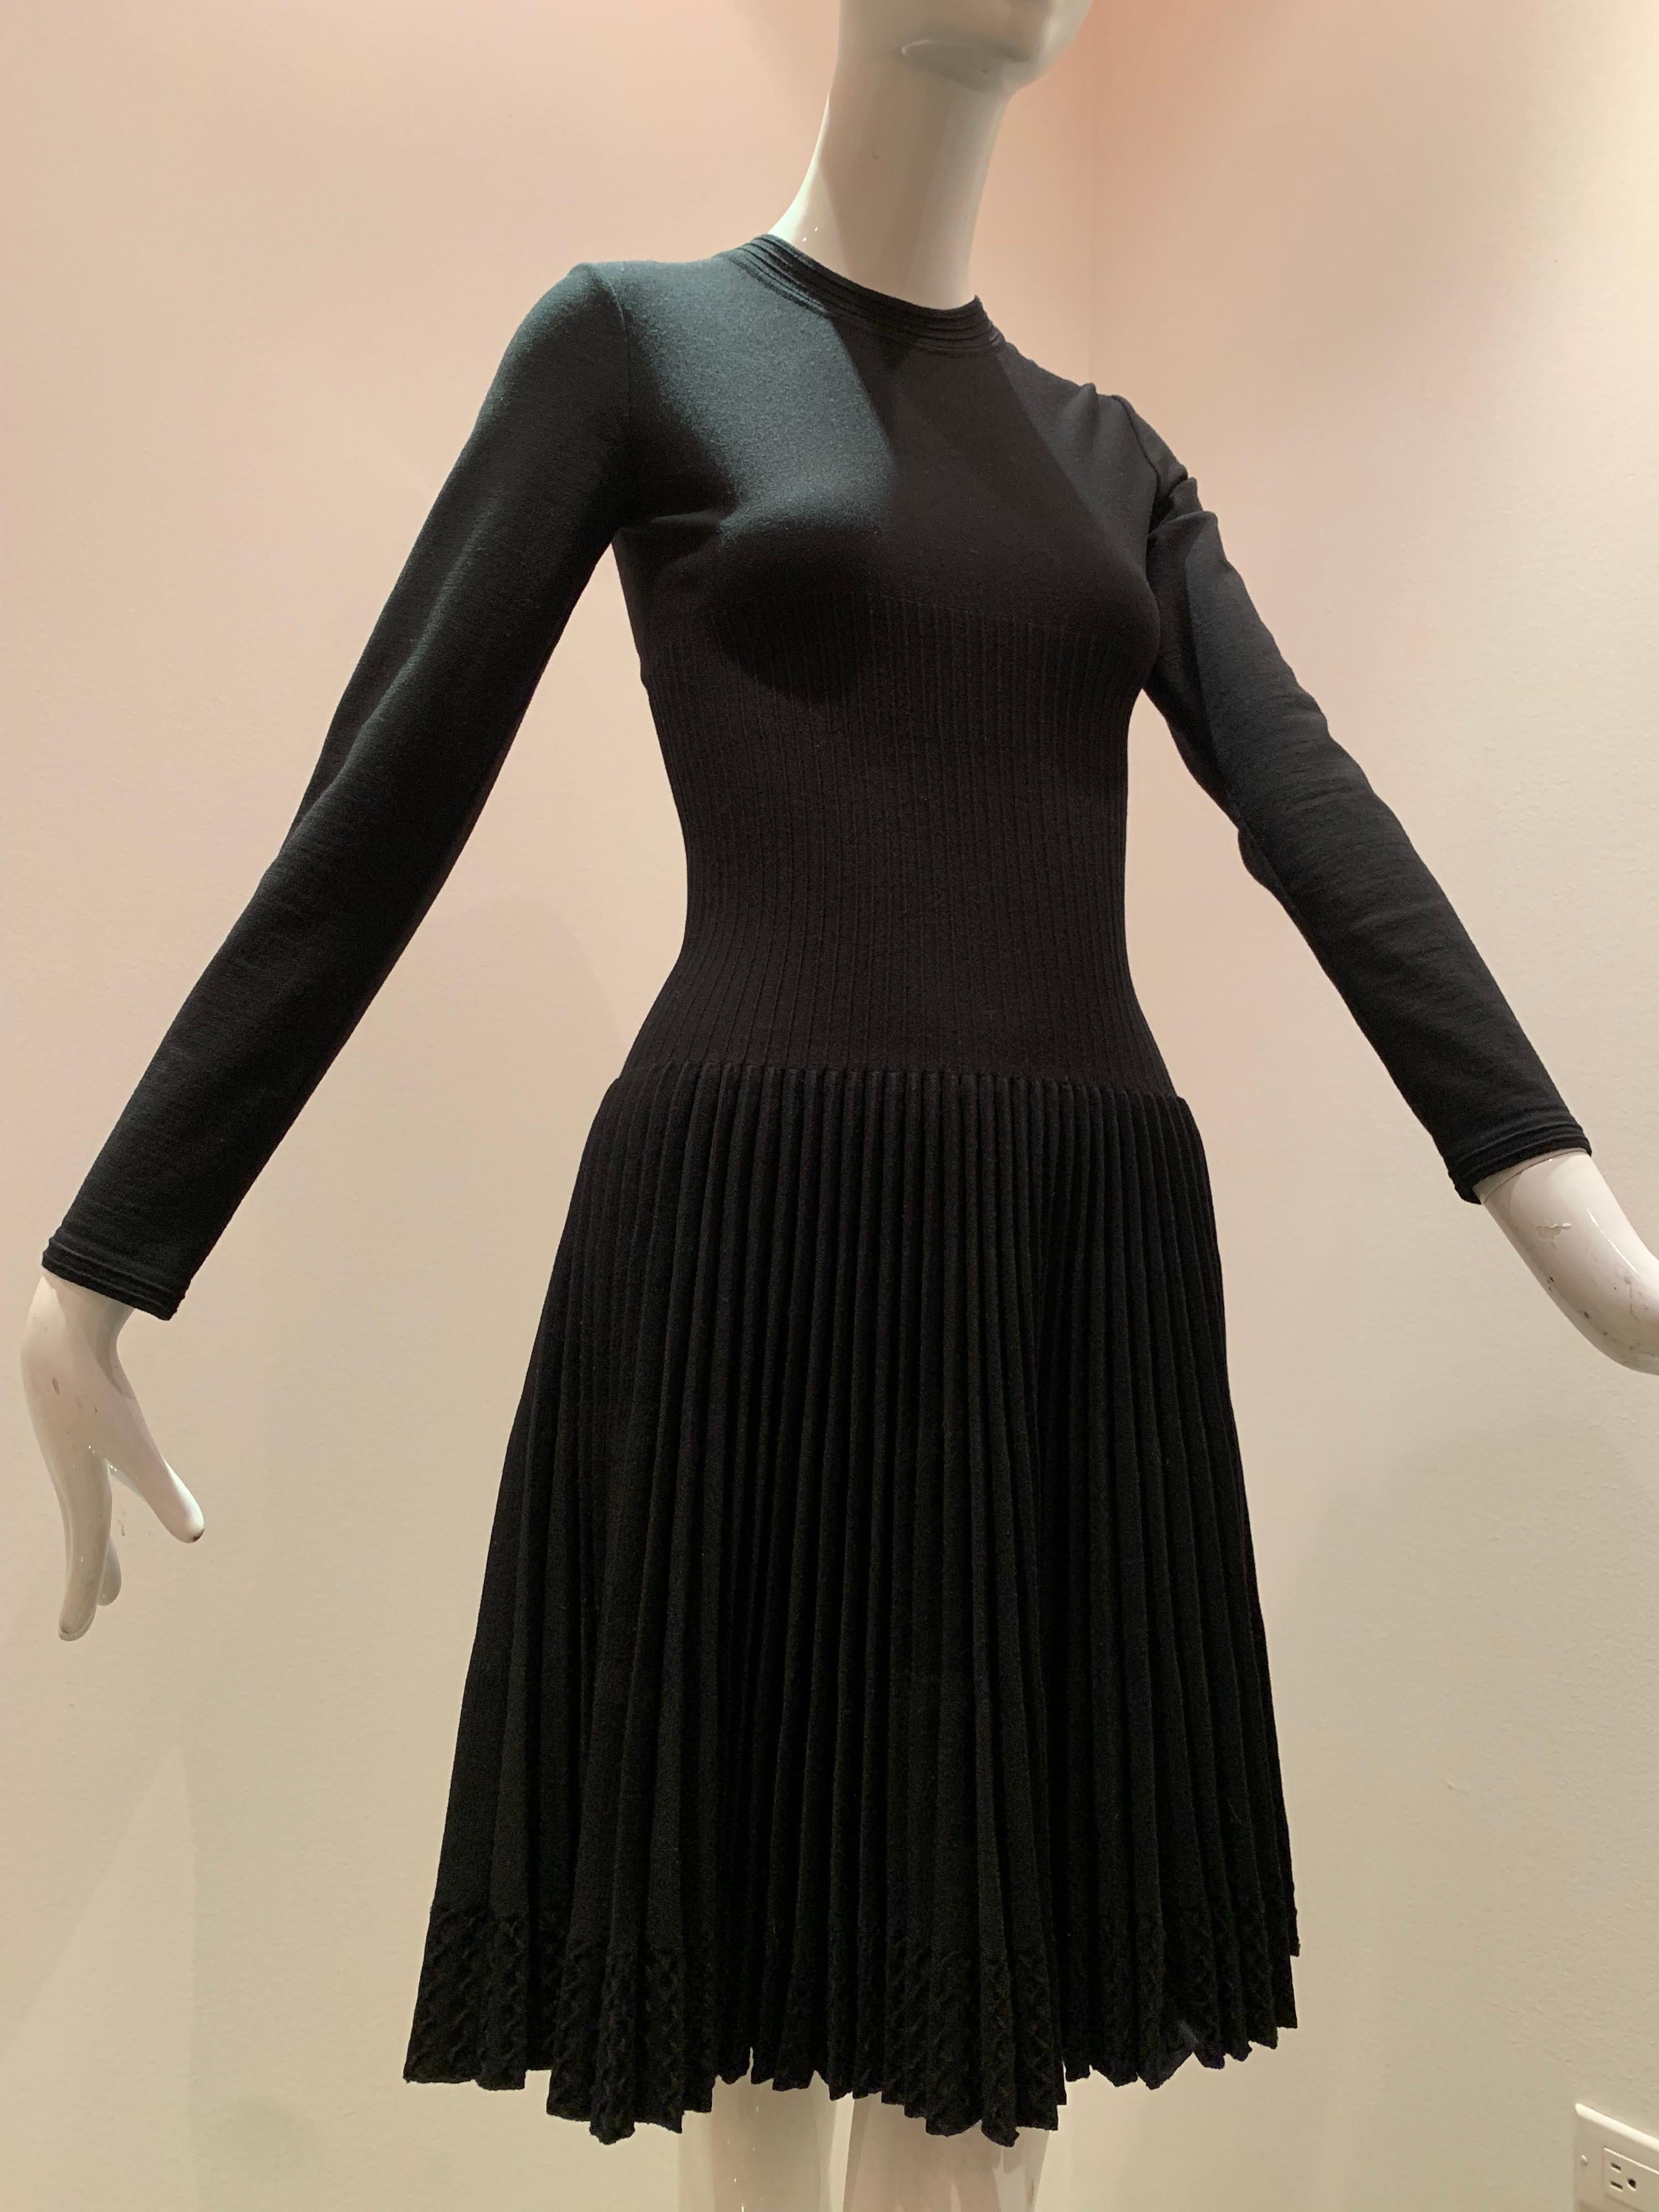 Alaia Black Knit Dress W/ High Neckline Dropped Waist and Pleated Flared Skirt 3